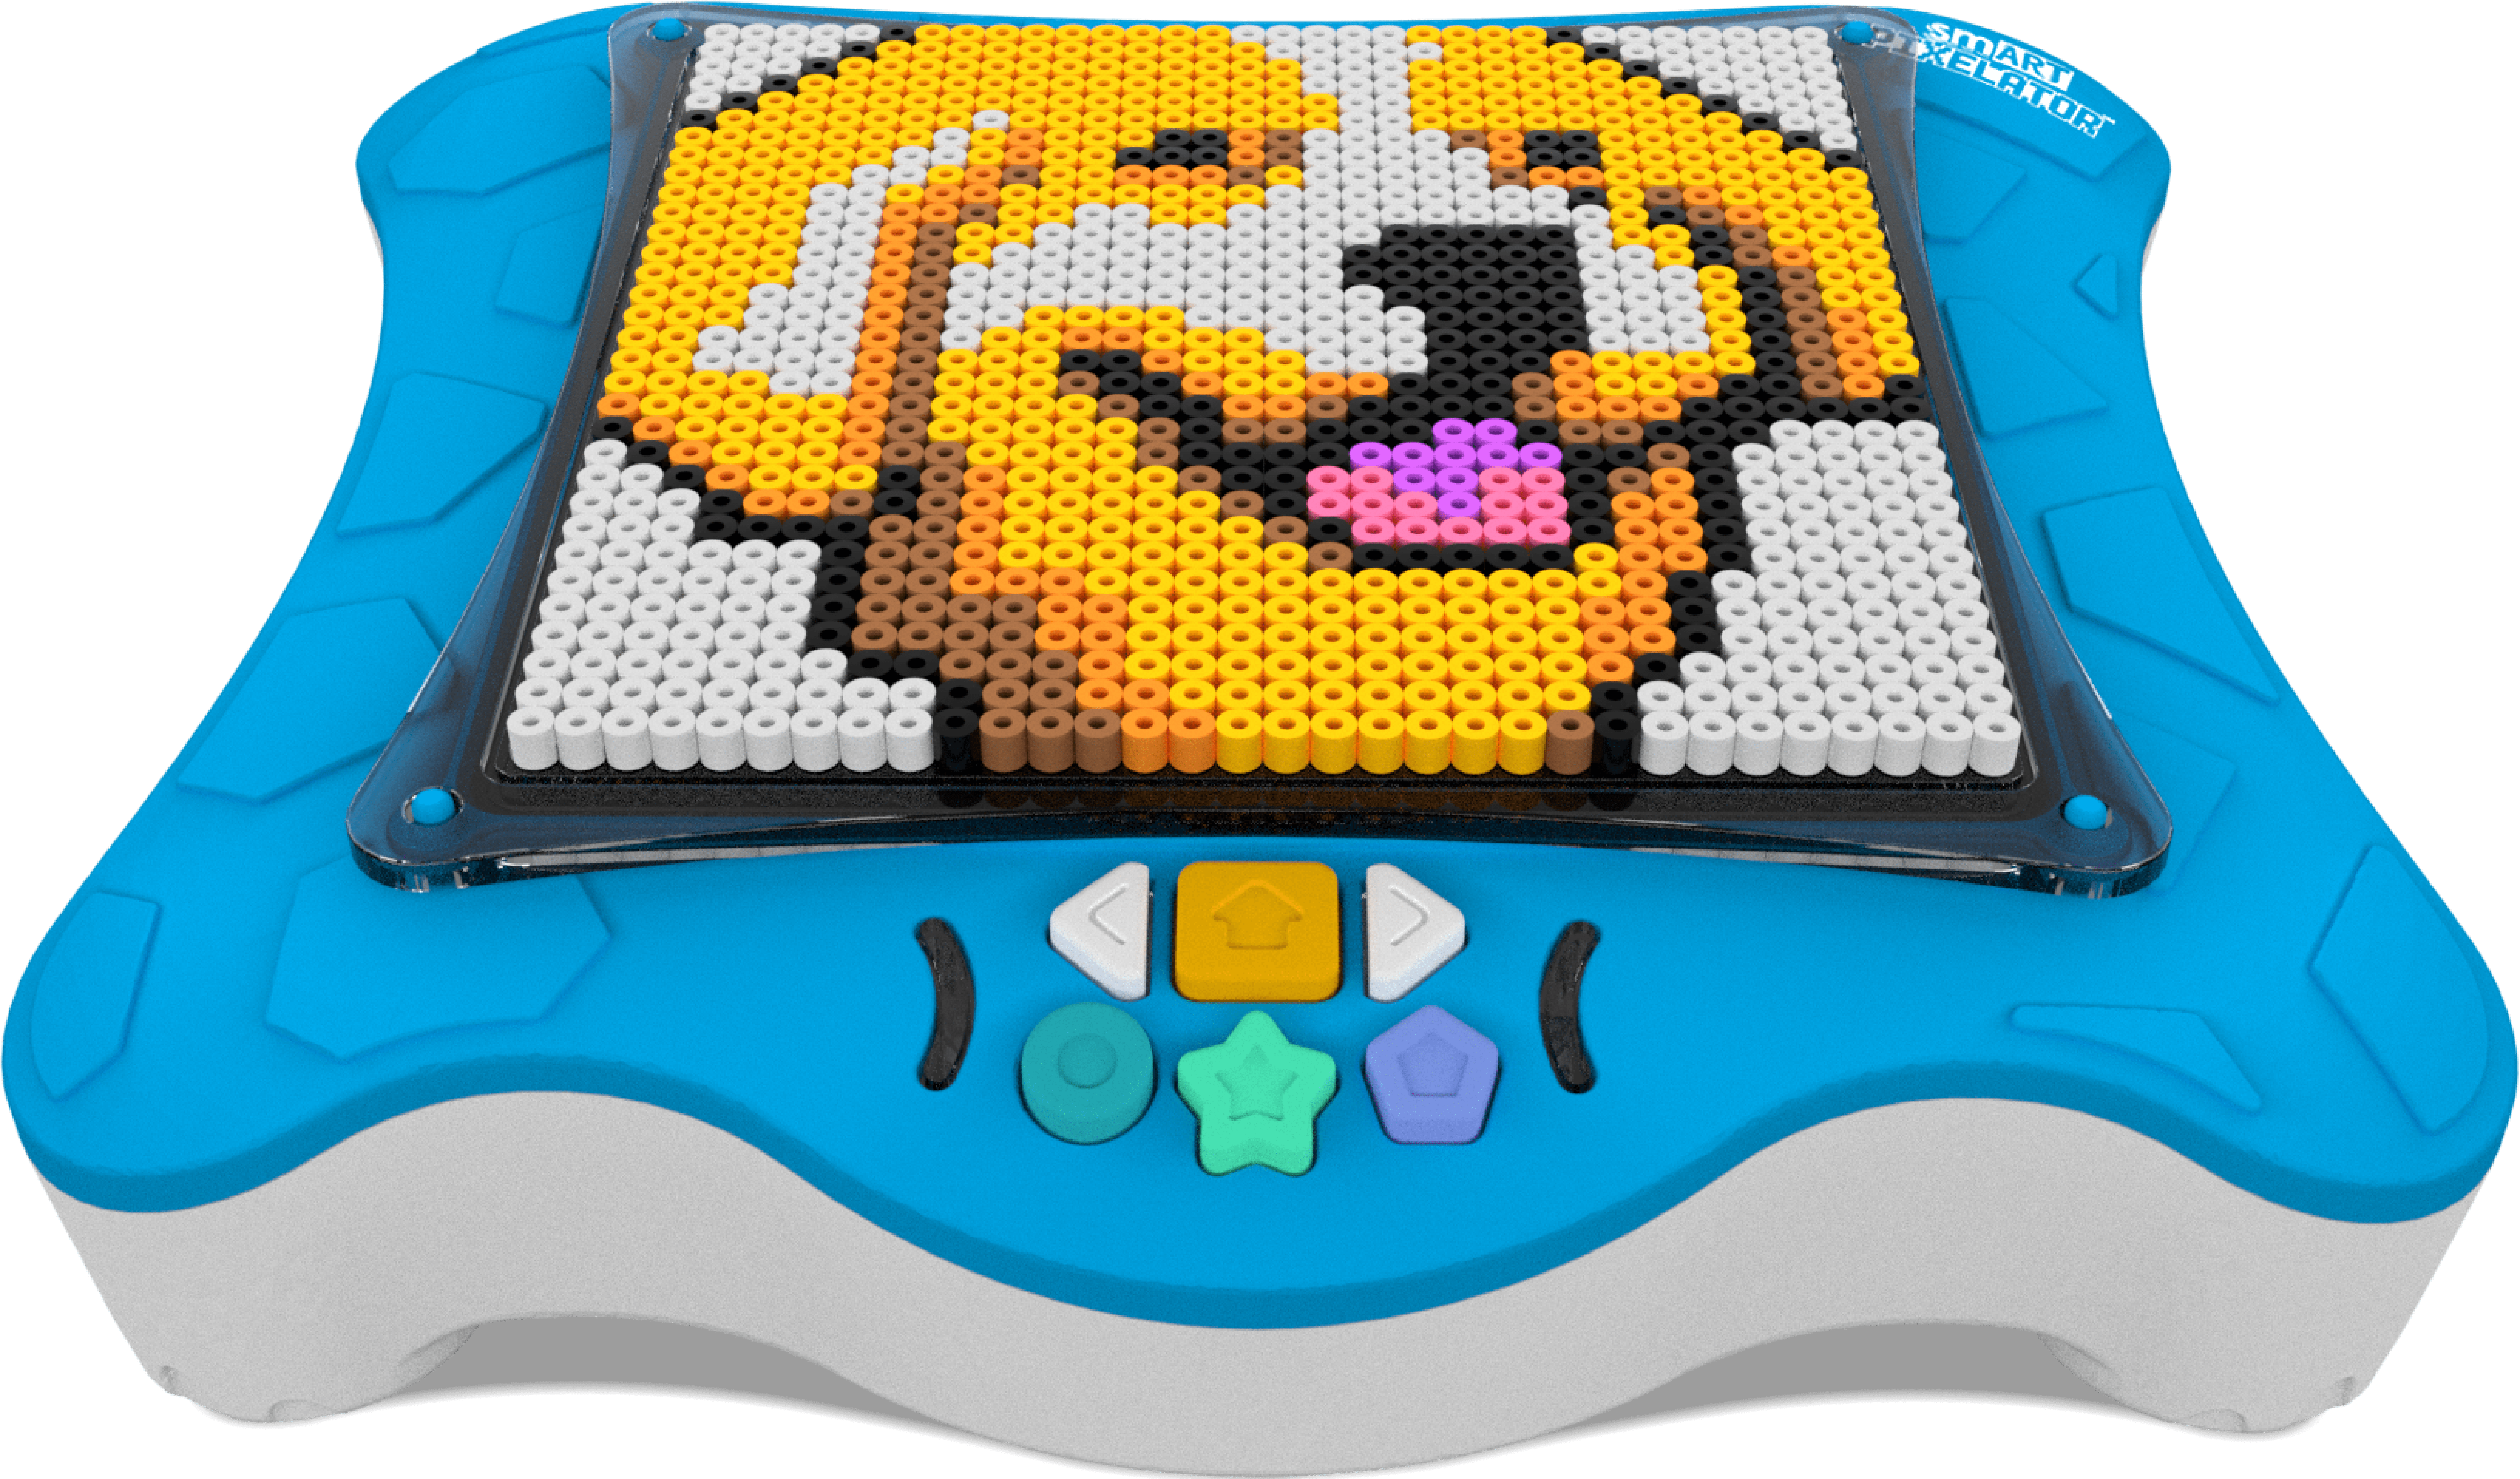 smART Pixelator: Create Your Own 3D Pixelated Art Projects, Gift for Kids, Ages 7+ - image 4 of 12